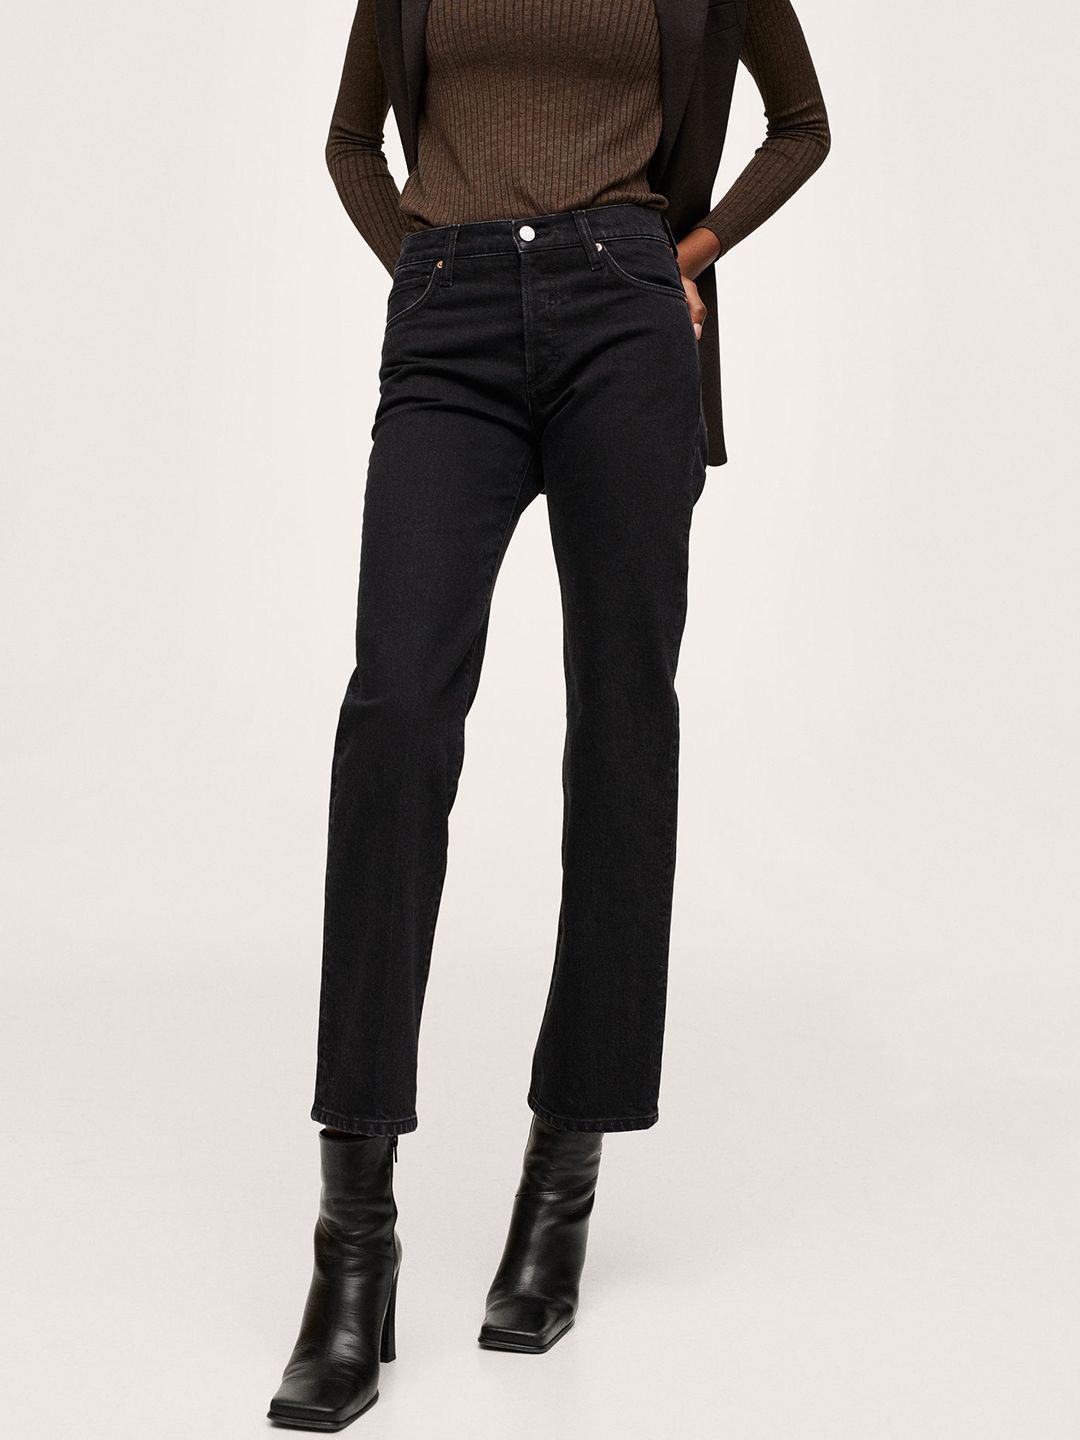 MANGO Women Black Straight Fit Stretchable Jeans Price in India